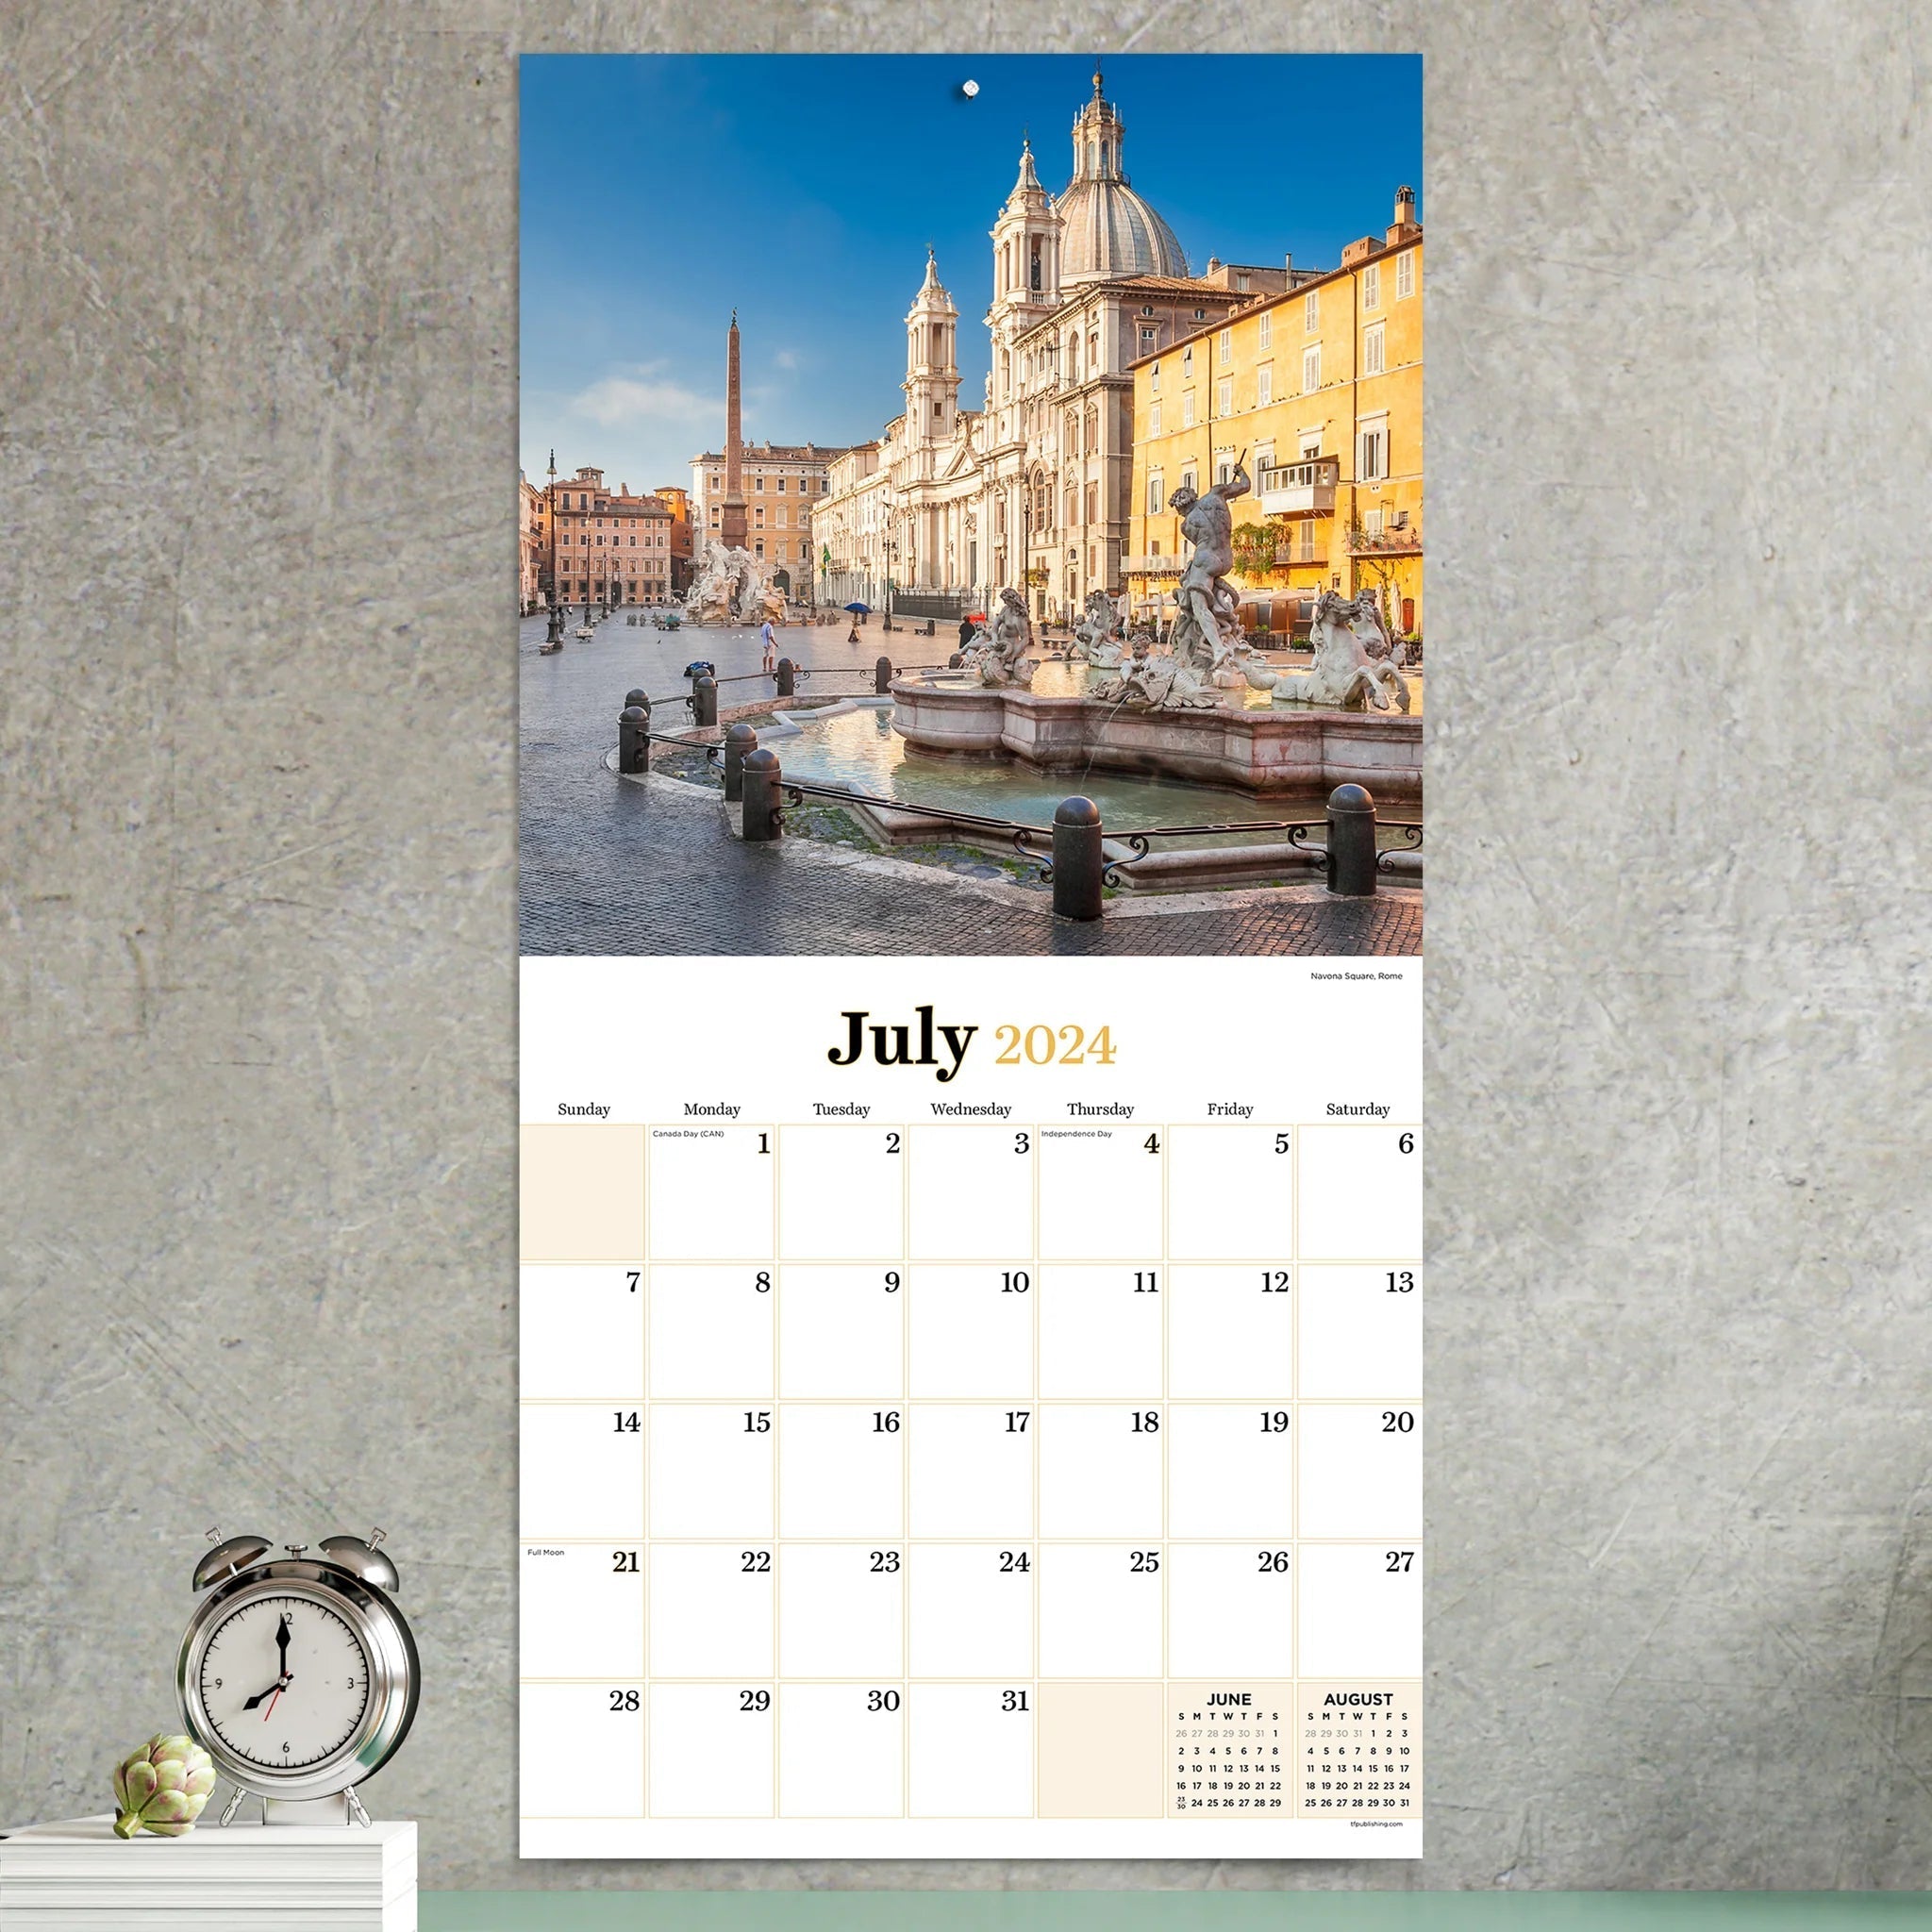 2024 Italy (by TF Publishing) - Square Wall Calendar